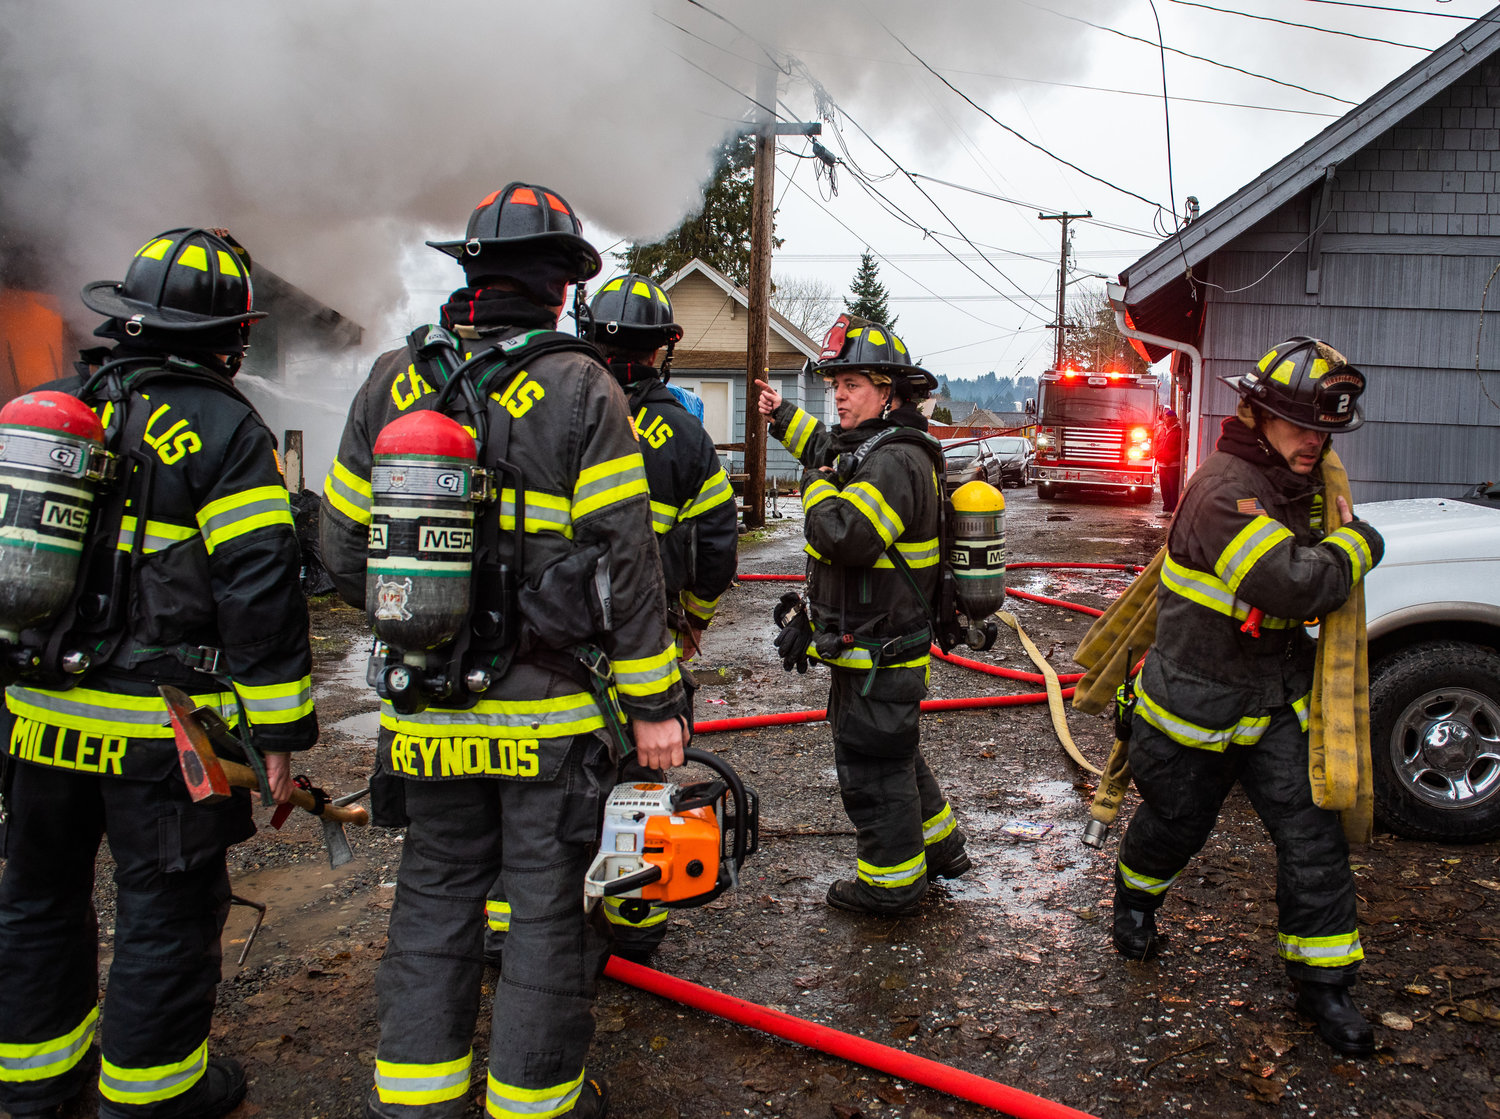 Captain Casey McCarthy, with Riverside Fire Authority, directs crews as they respond to a residential structure fire off W. Main Street in Centralia on Sunday.